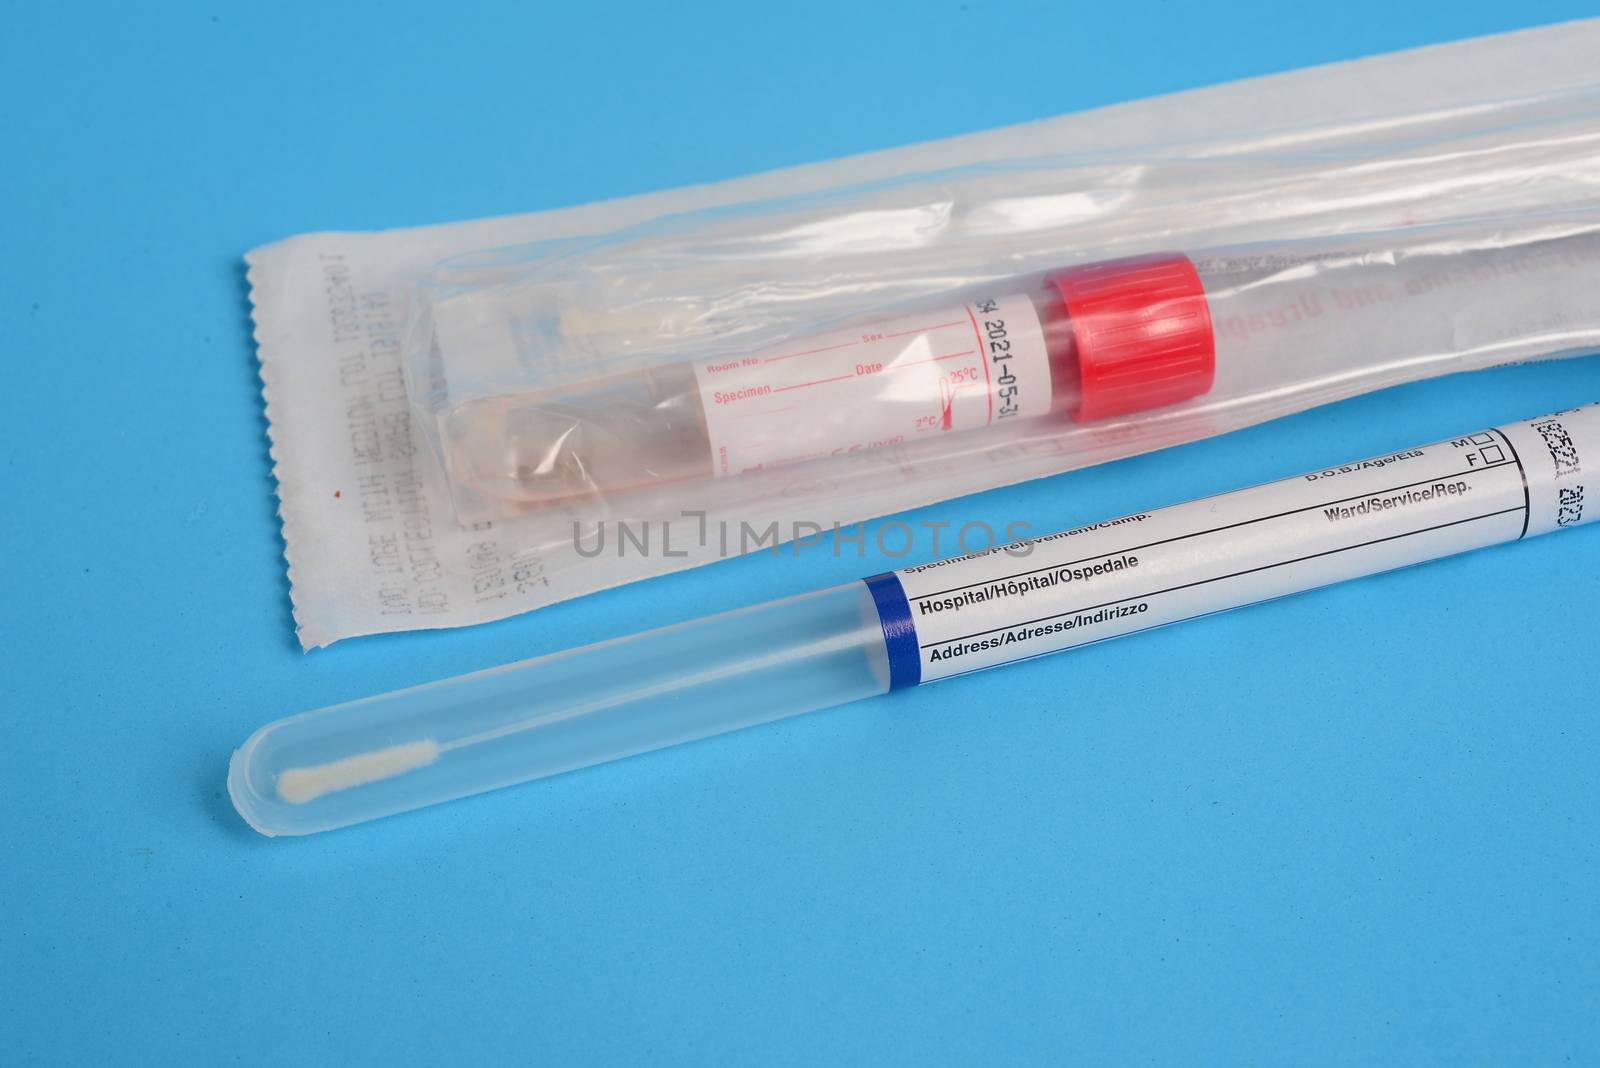 Universal Transport Medium for Viruses, Chlamydia, Mycoplasma and Ureaplasma and swab for nasopharyngeal sample collection by ideation90